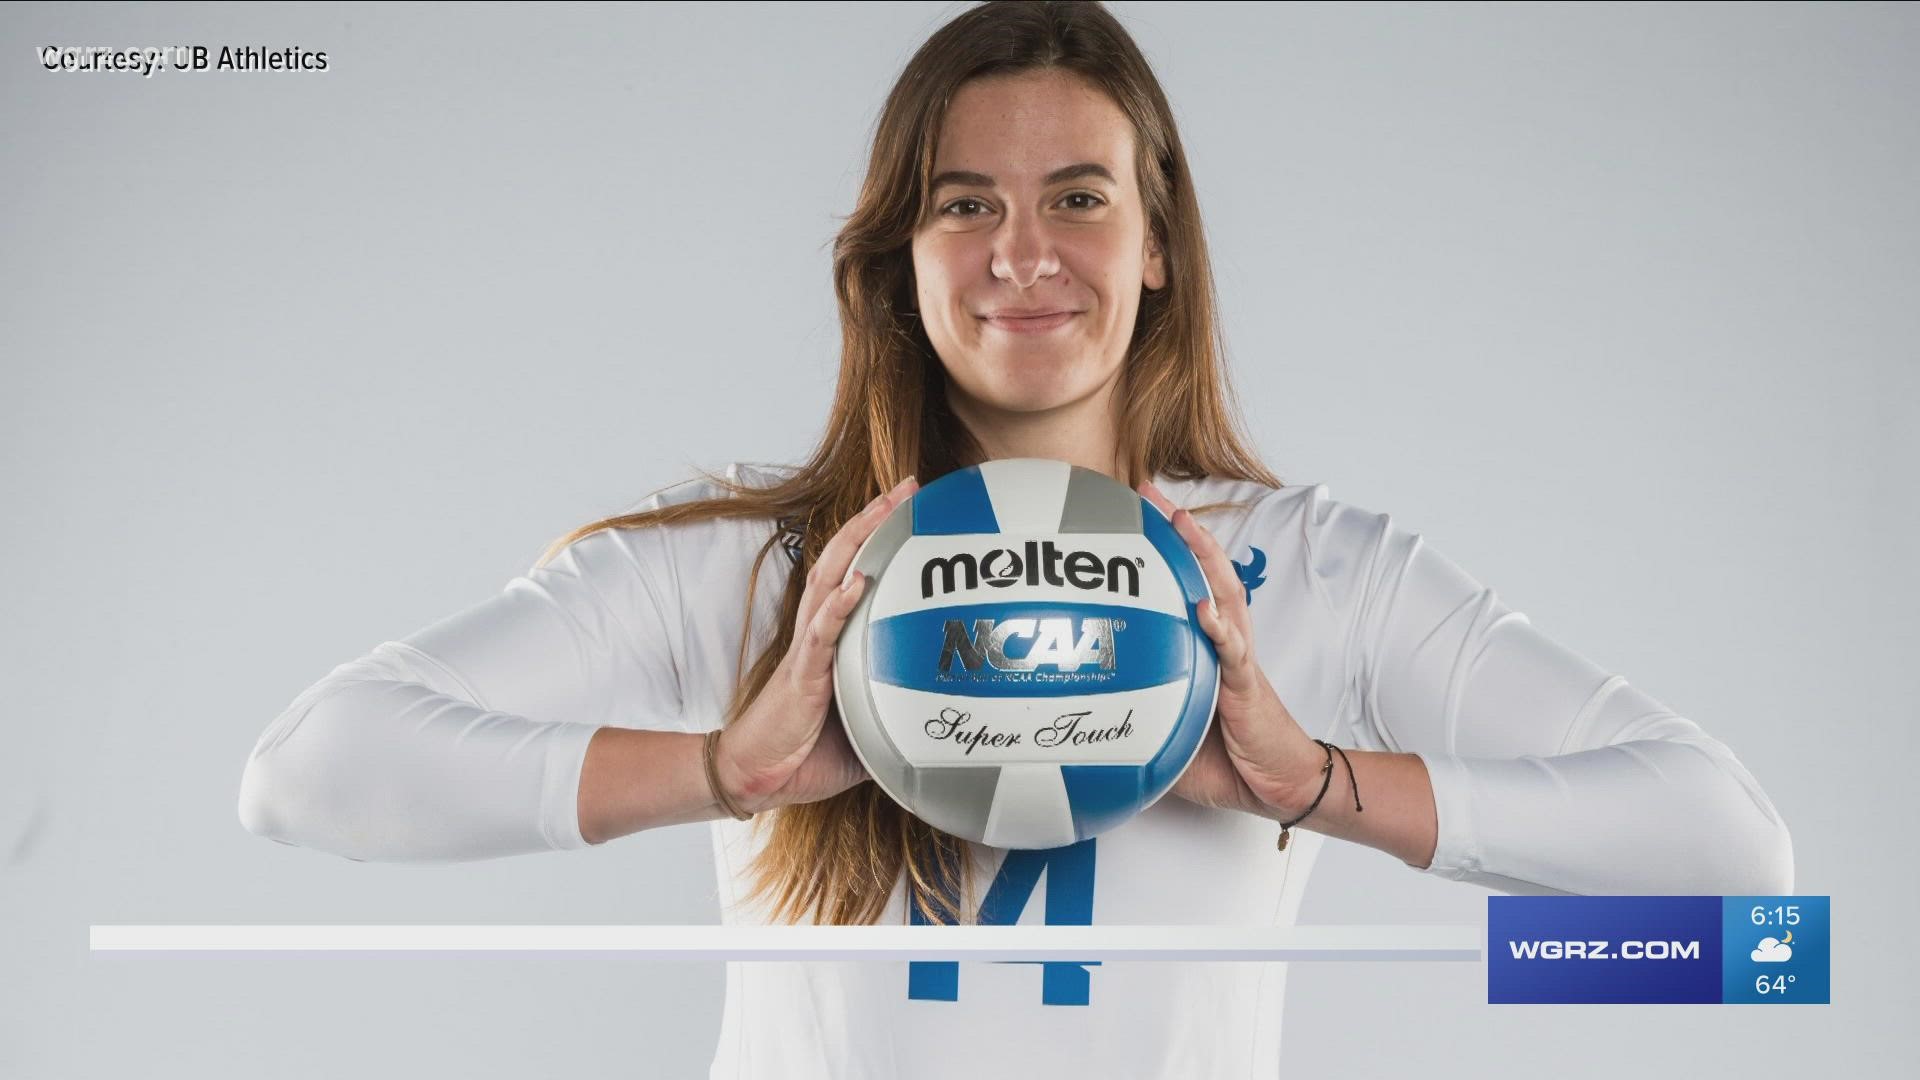 23-year-old Monika Simkova dreamed of becoming a professional volleyball player. Recently doctors had to amputate part of both her legs because of a rare infection.